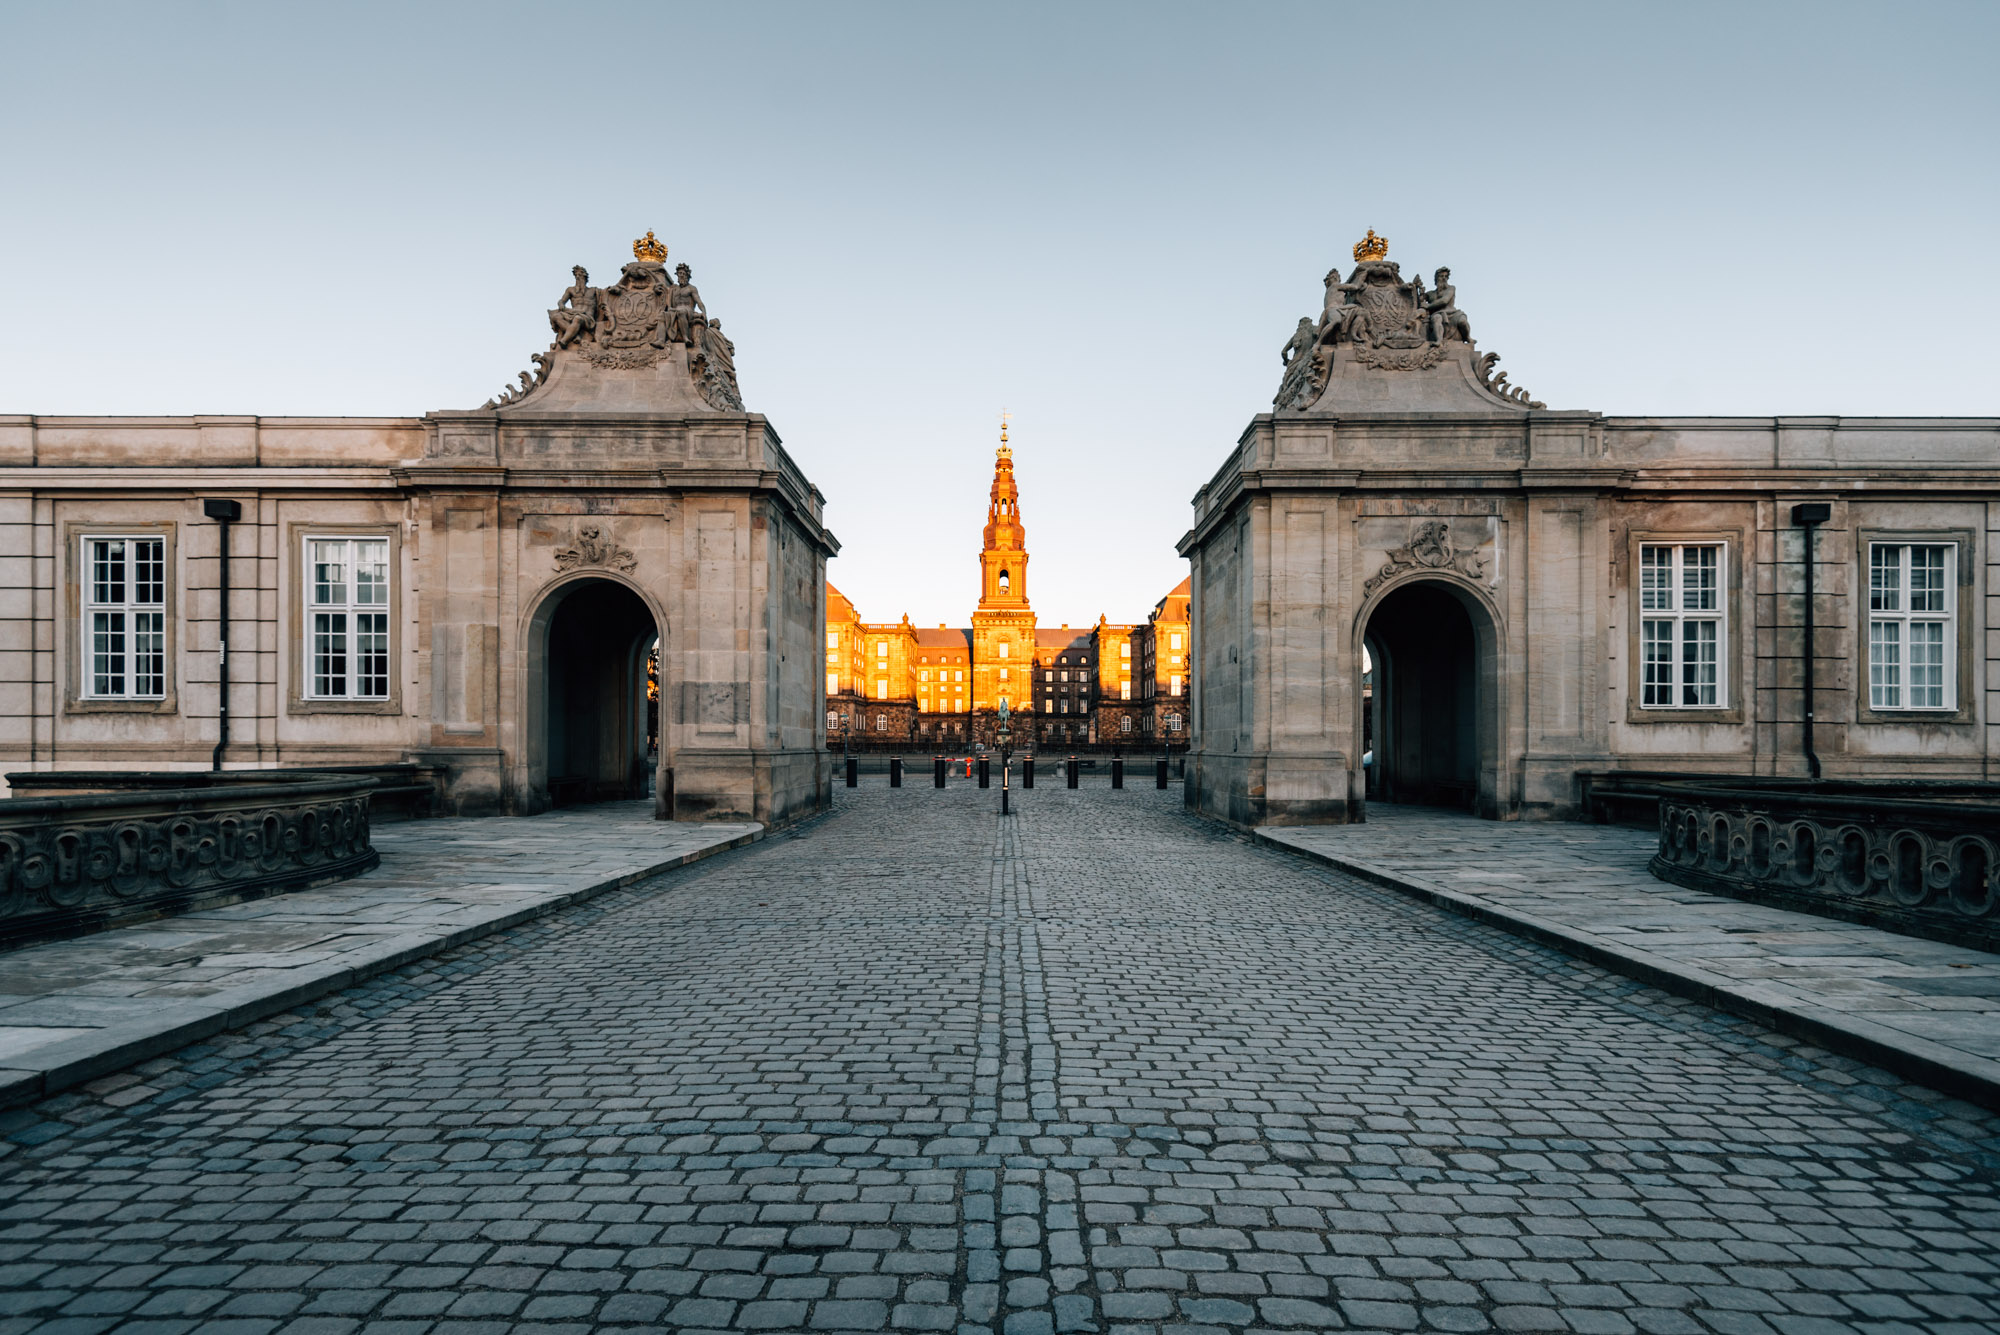 Jeff On The Road - Copenhagen - Activity - Christiansborg Palace - All the photos are under Copyright © 2017 Jeff Frenette Photography / dezjeff. To use the photos, please contact me at dezjeff@me.com.